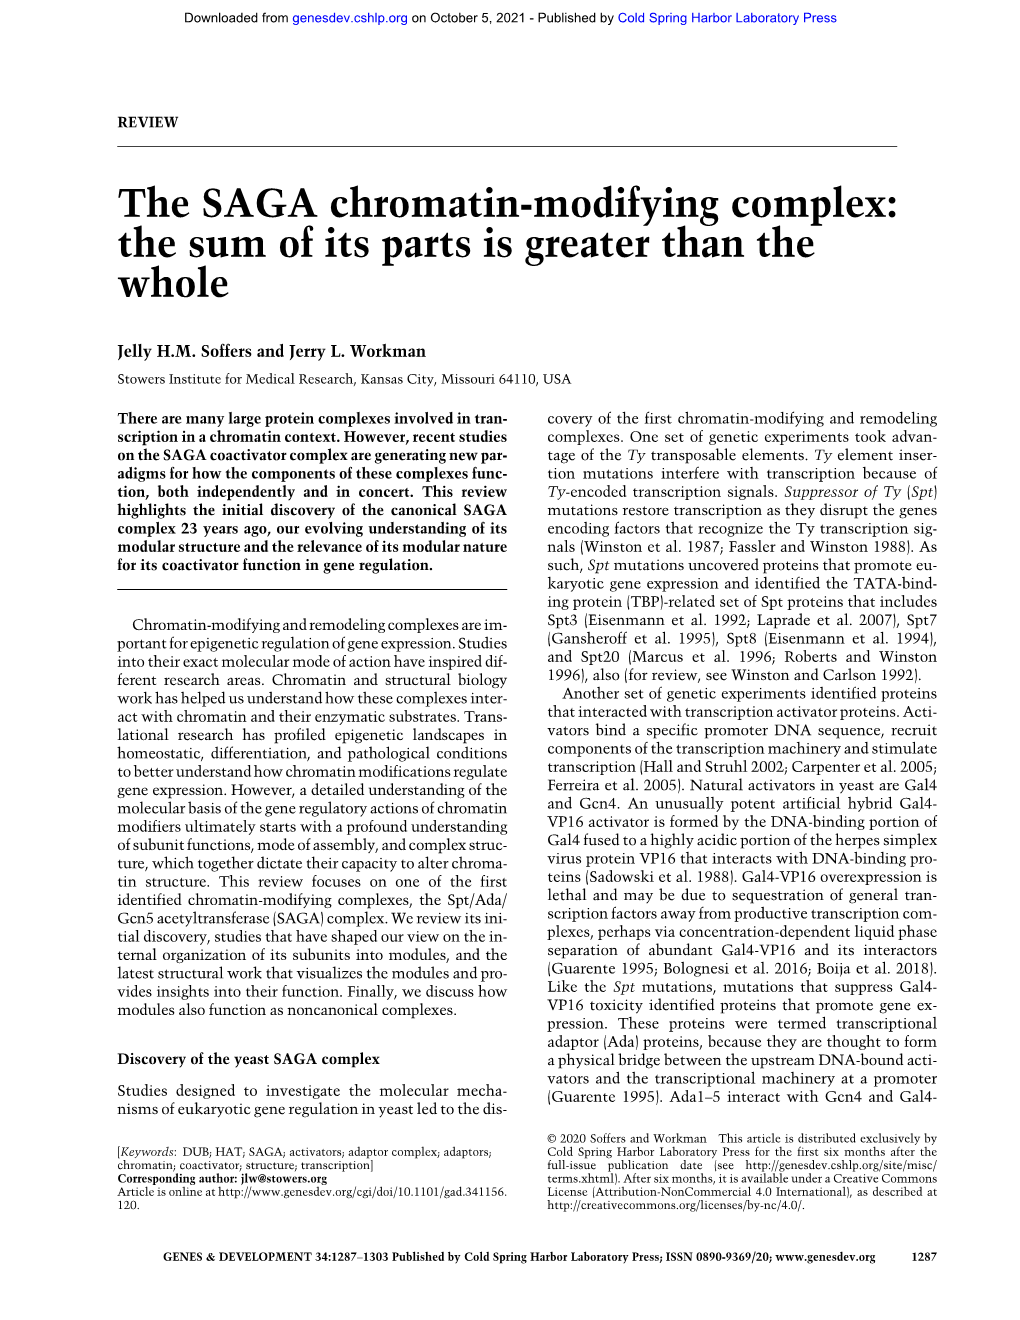 The SAGA Chromatin-Modifying Complex: the Sum of Its Parts Is Greater Than the Whole